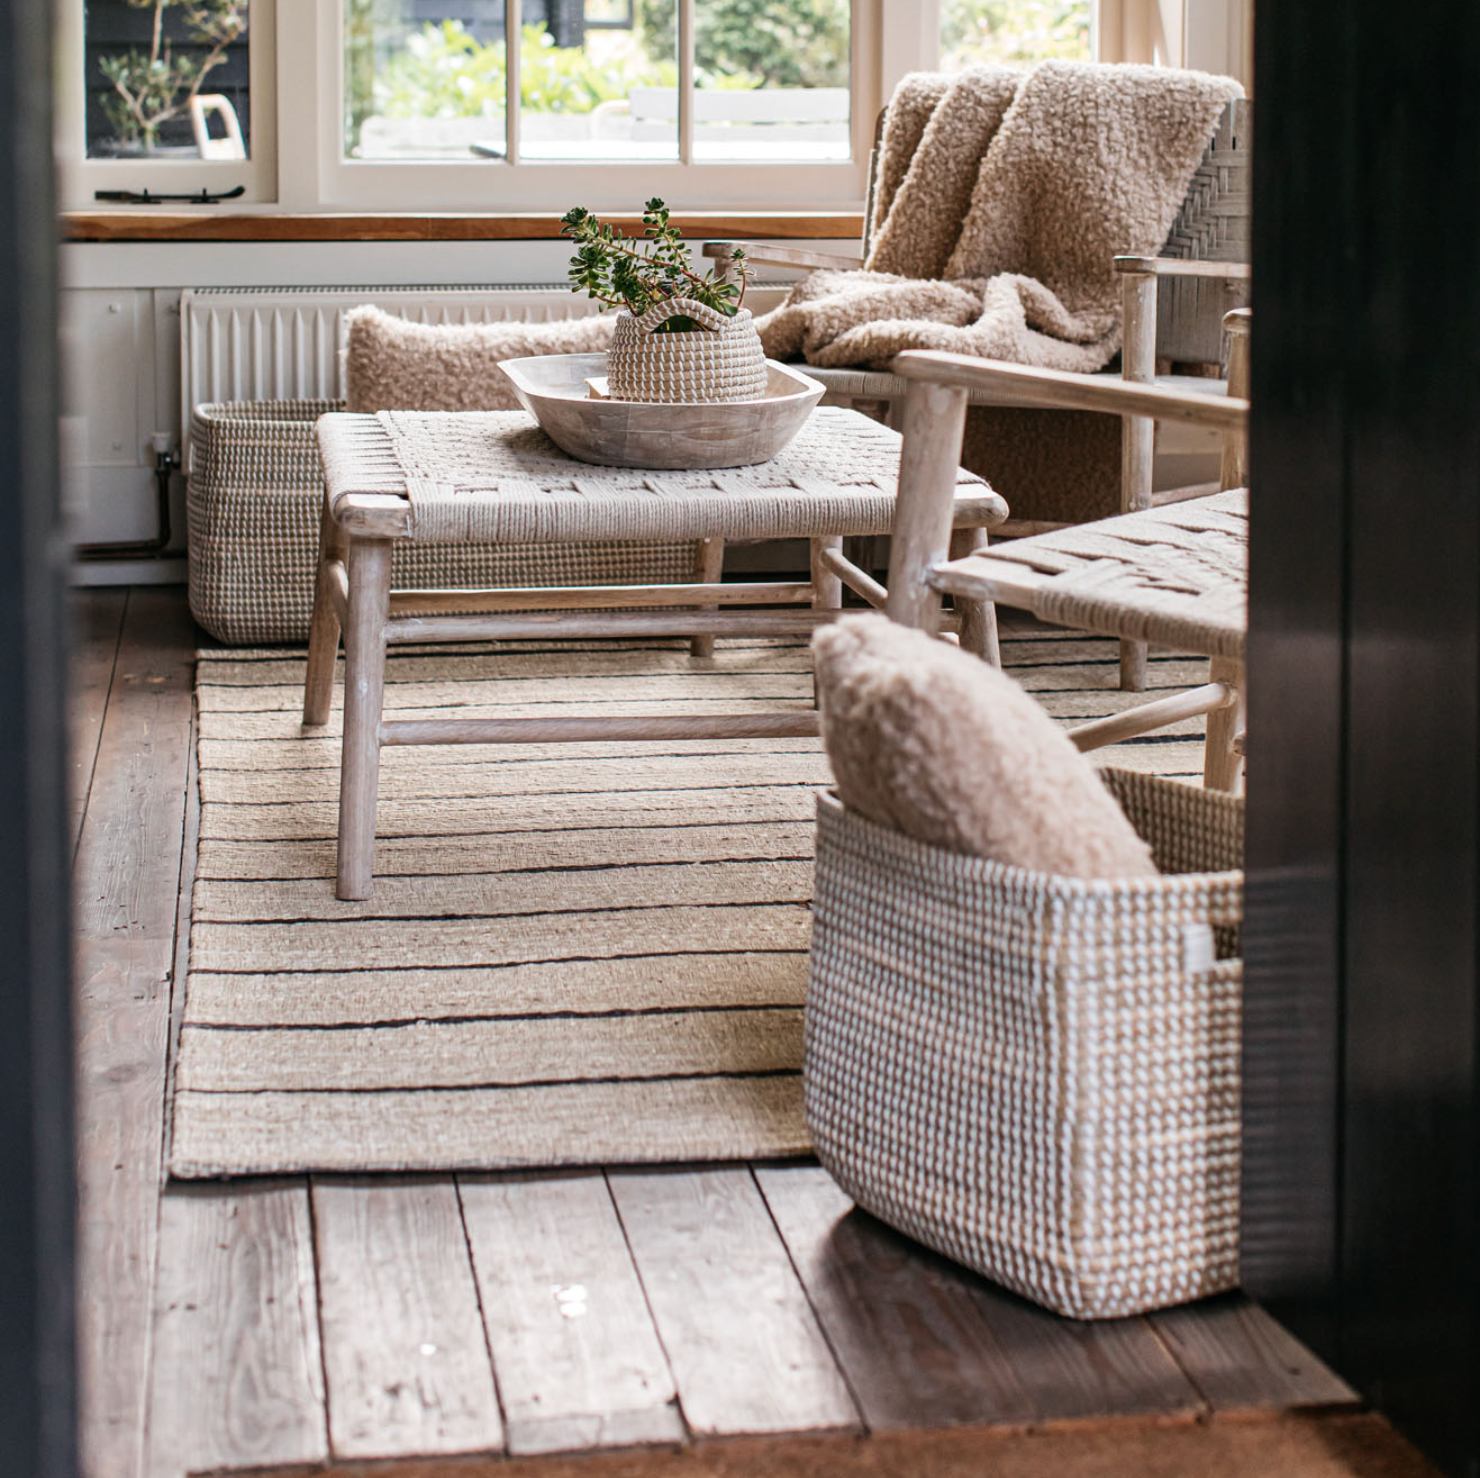 A striped jute rug with a wooden armchair and woven coffee table.